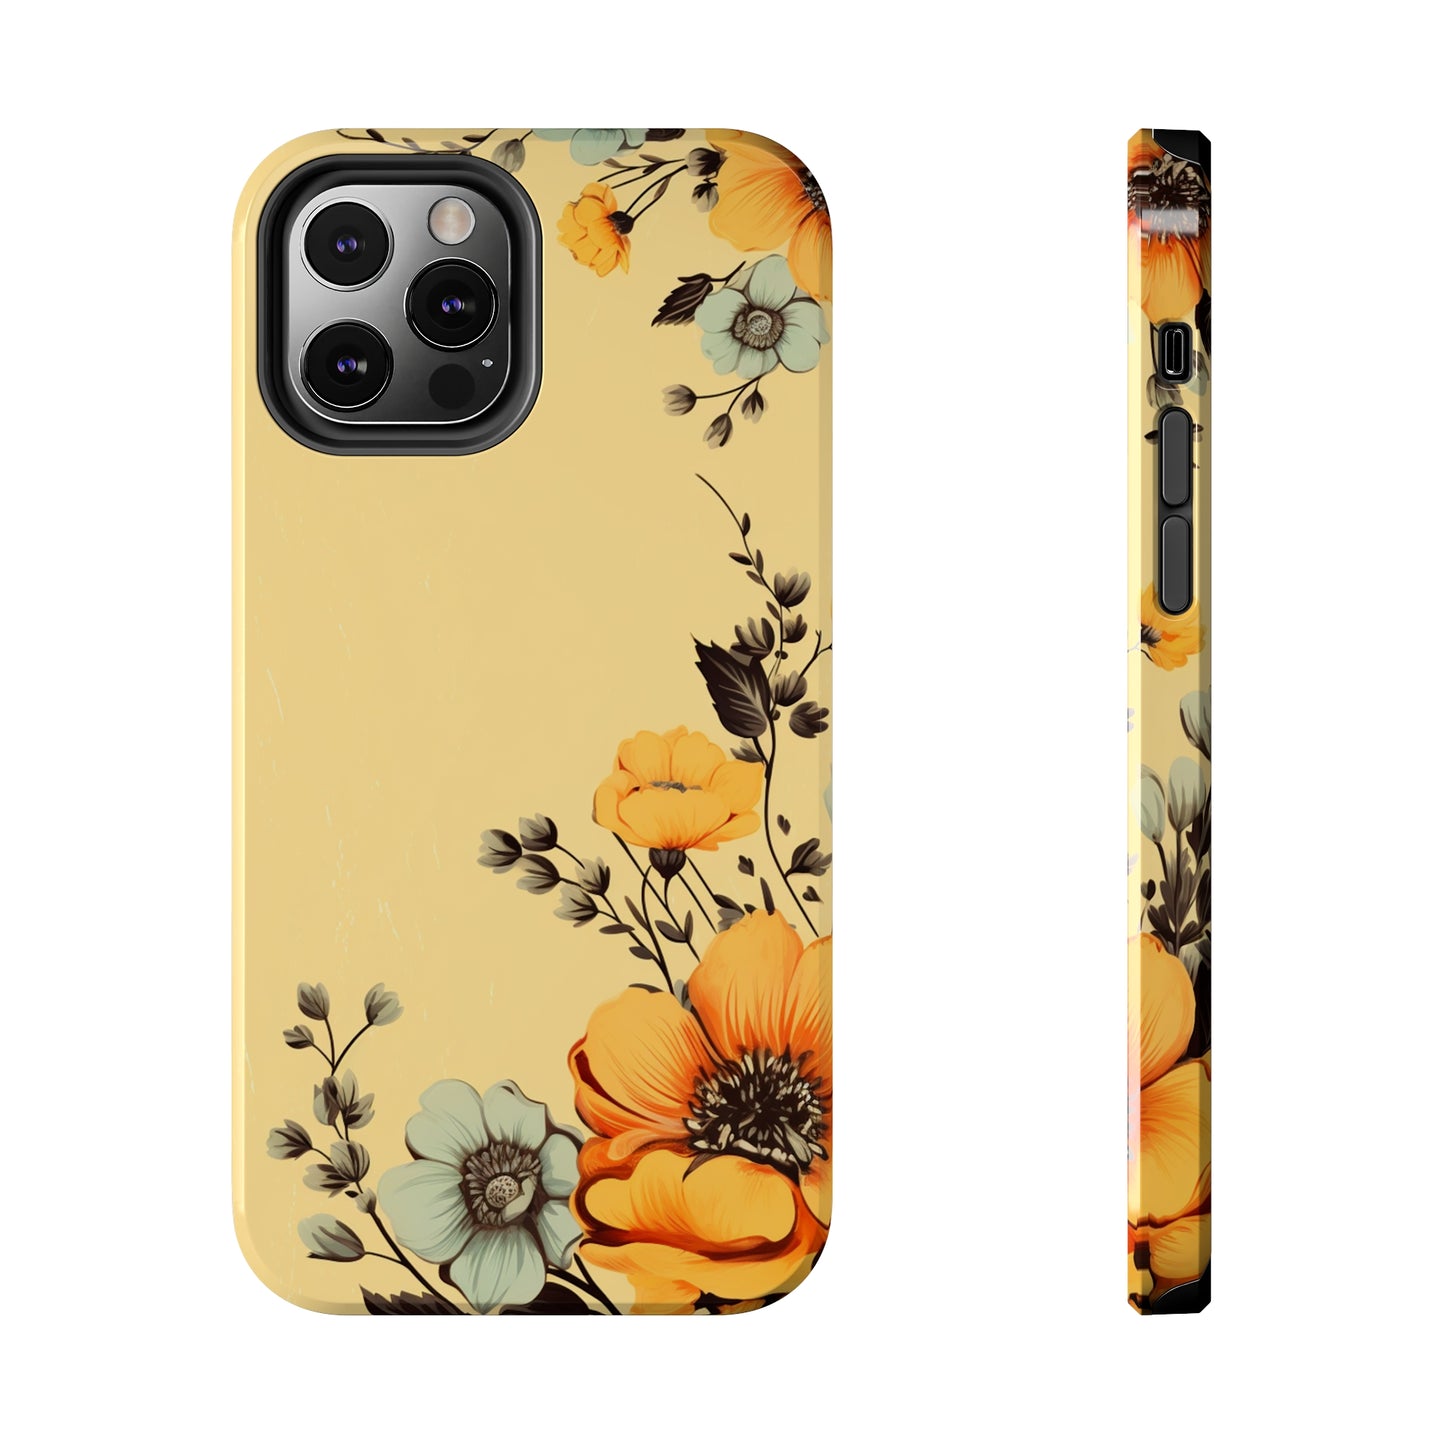 iPhone 8 and X case celebrating vintage floral charm